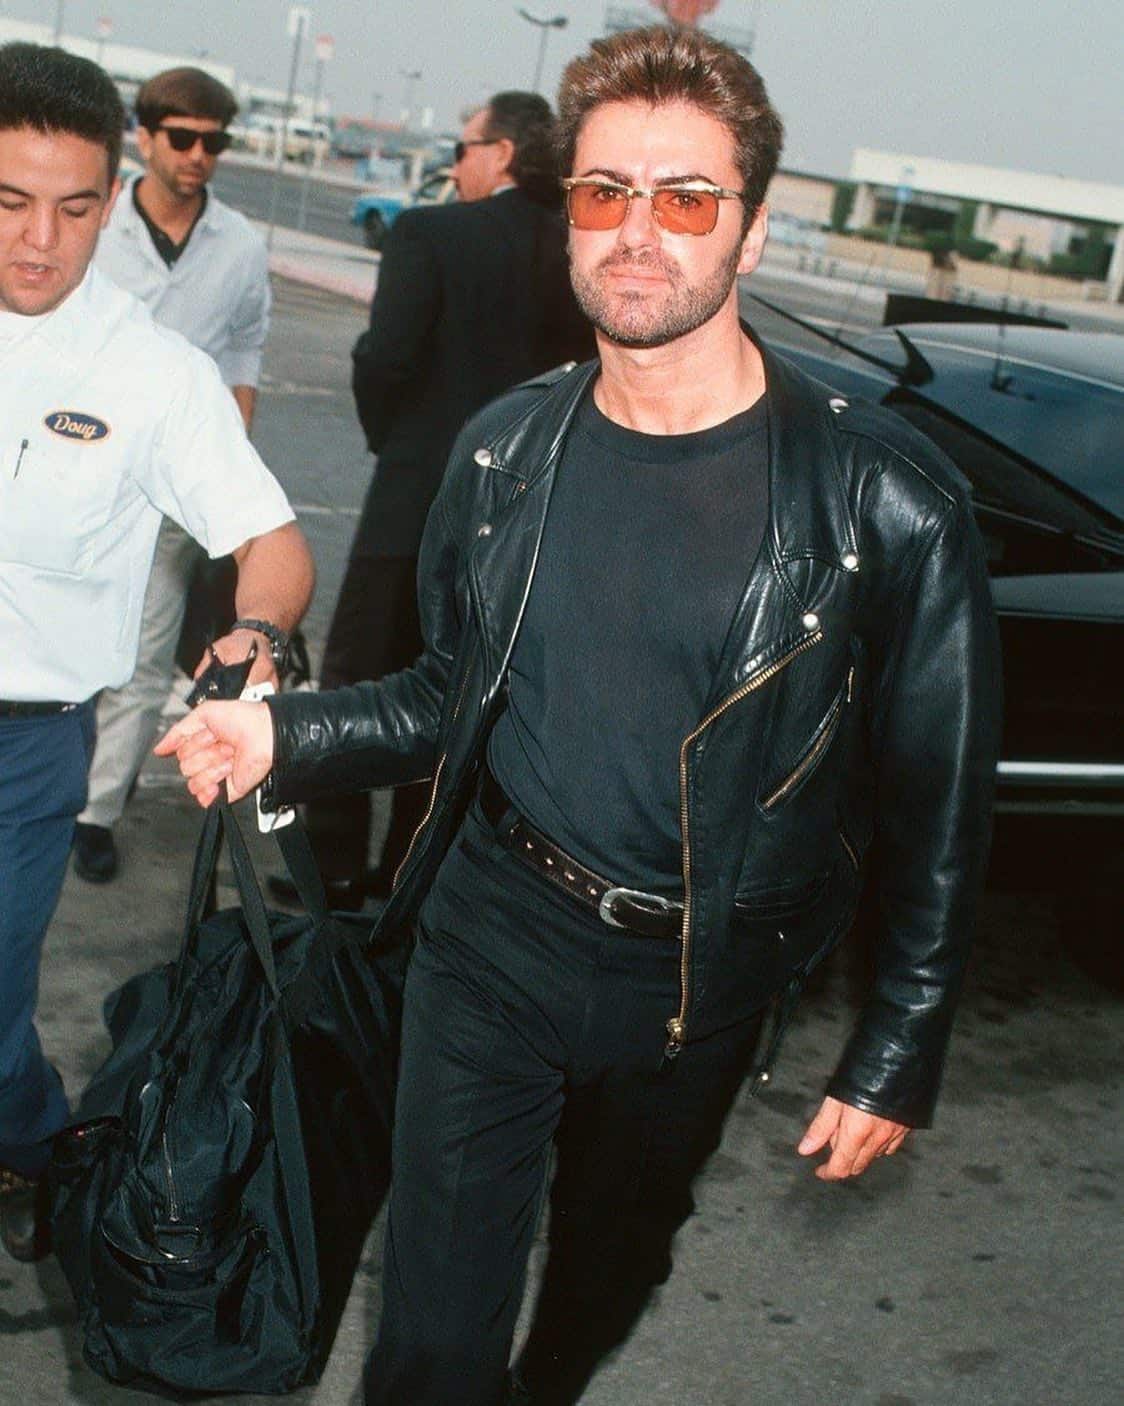 george michael wearing all black outfit 1990